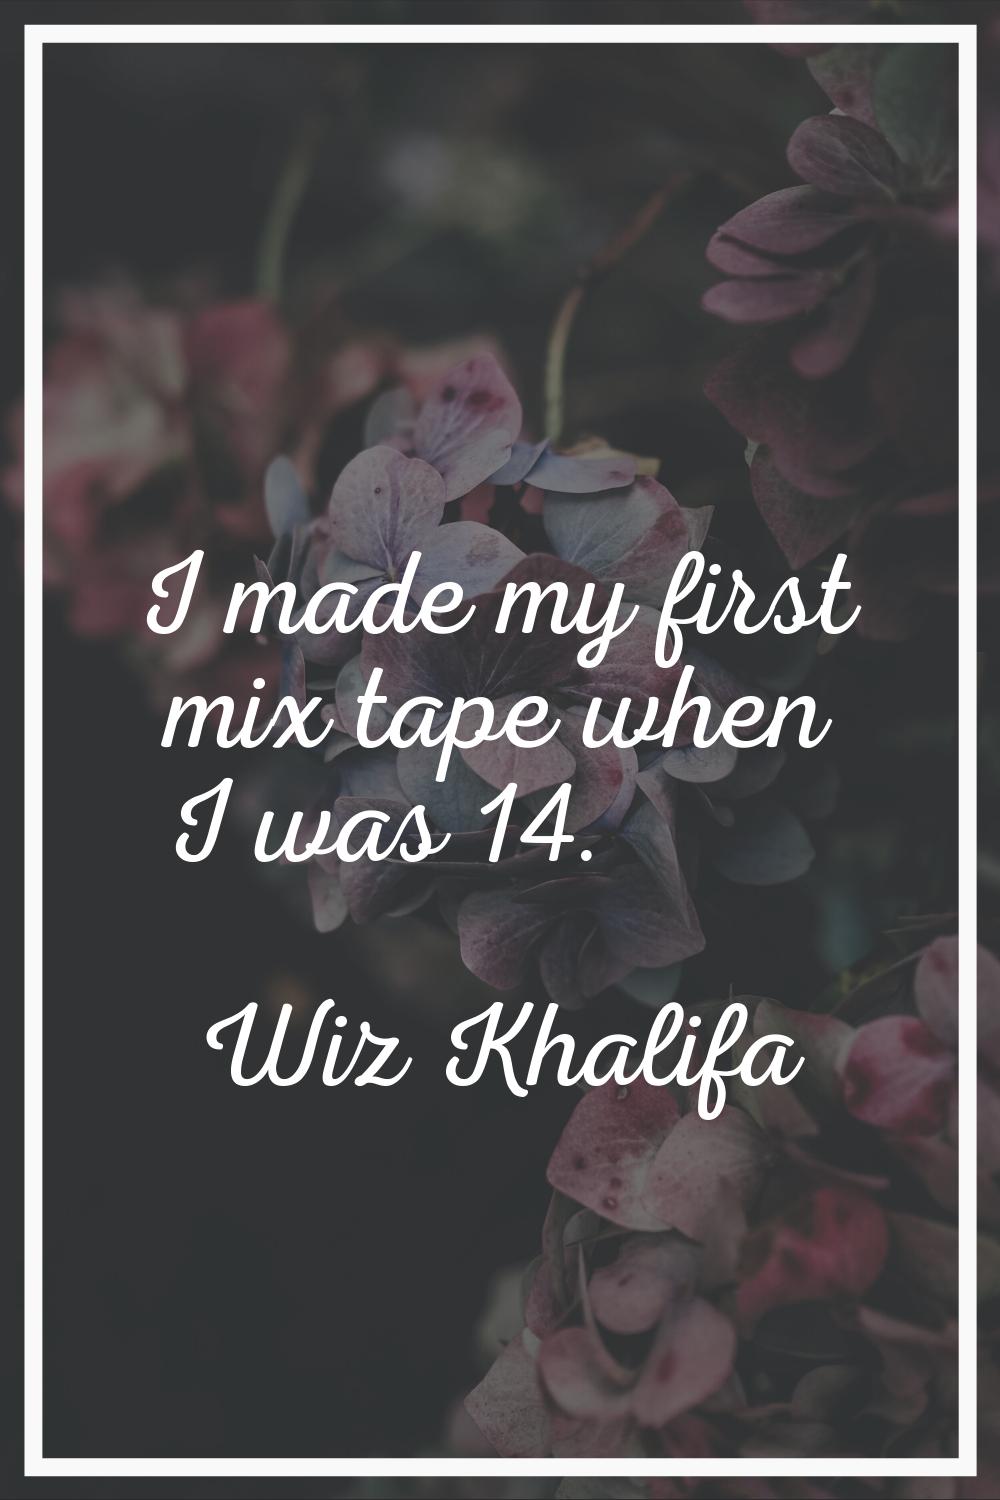 I made my first mix tape when I was 14.